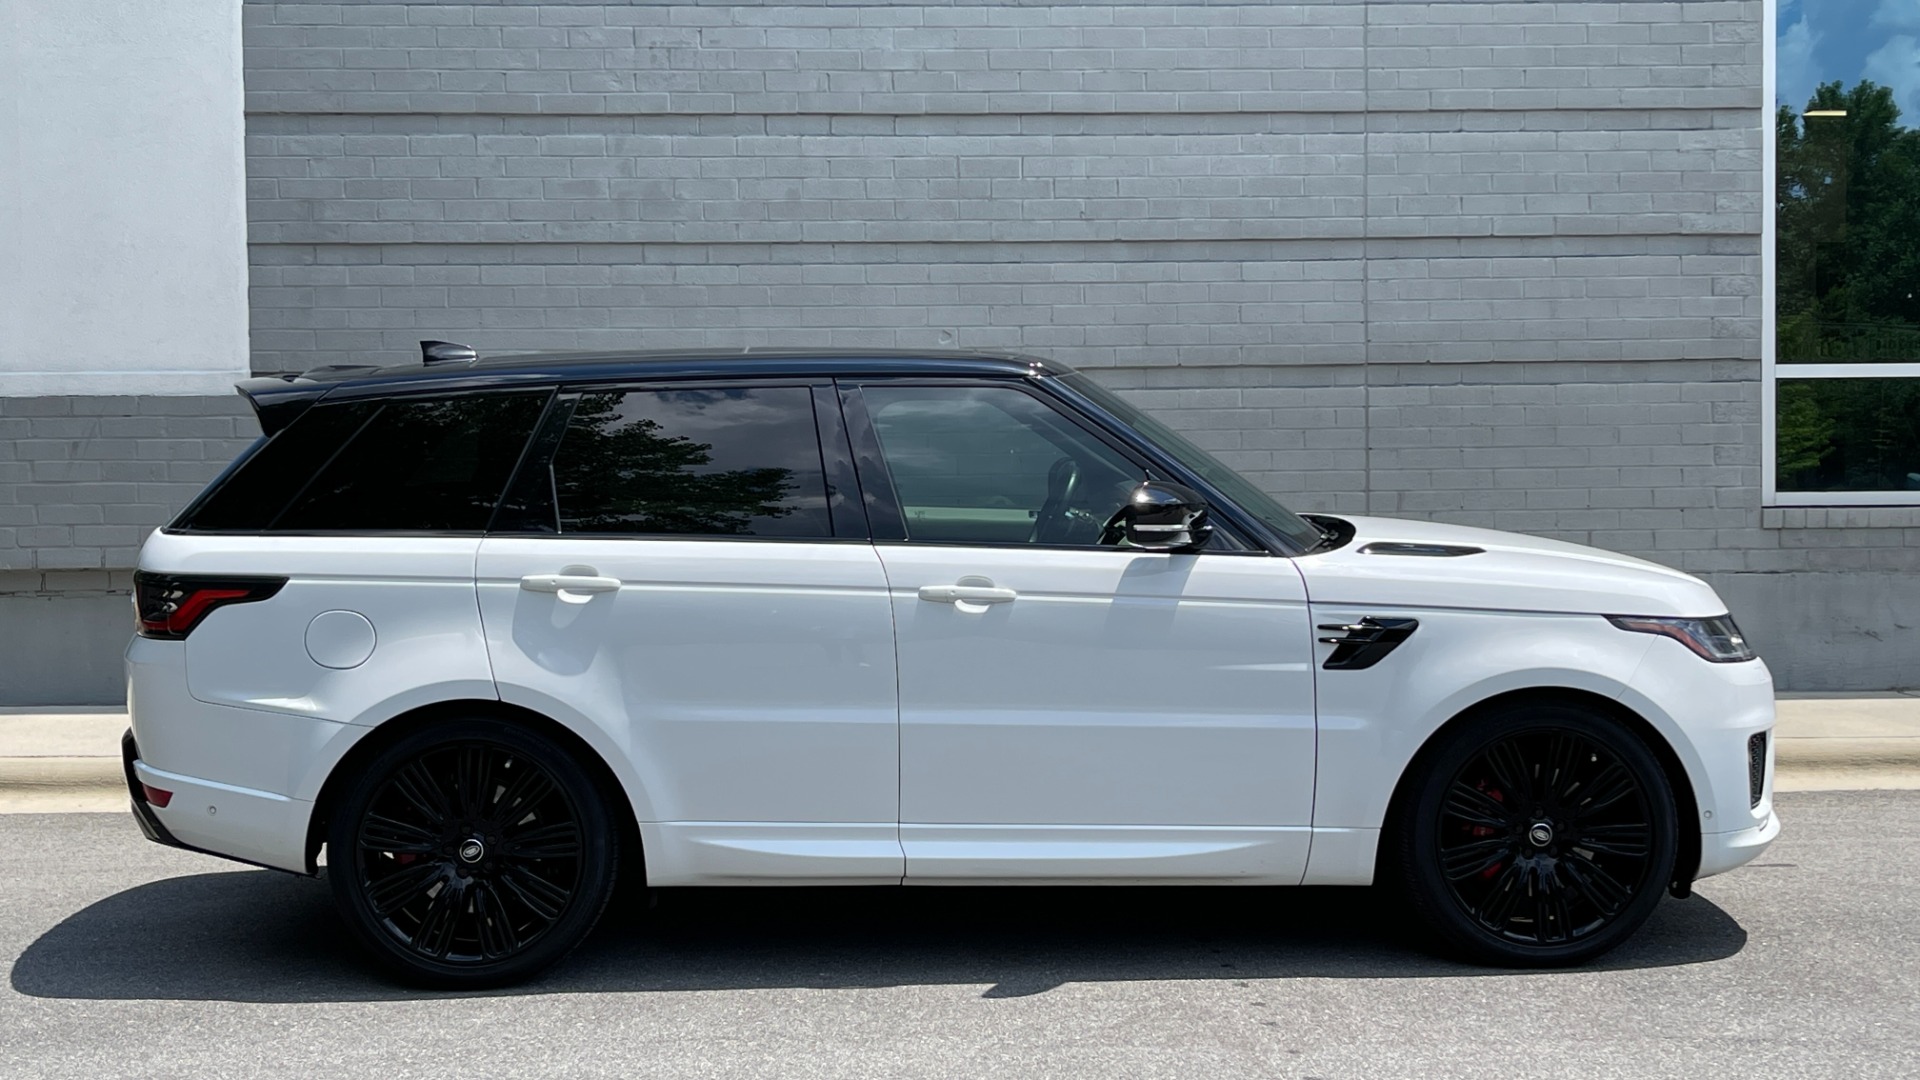 Used 2019 Land Rover Range Rover Sport DYNAMIC / BLACKOUT PACK / VISION ASSIST / 22IN WHEELS for sale Sold at Formula Imports in Charlotte NC 28227 3